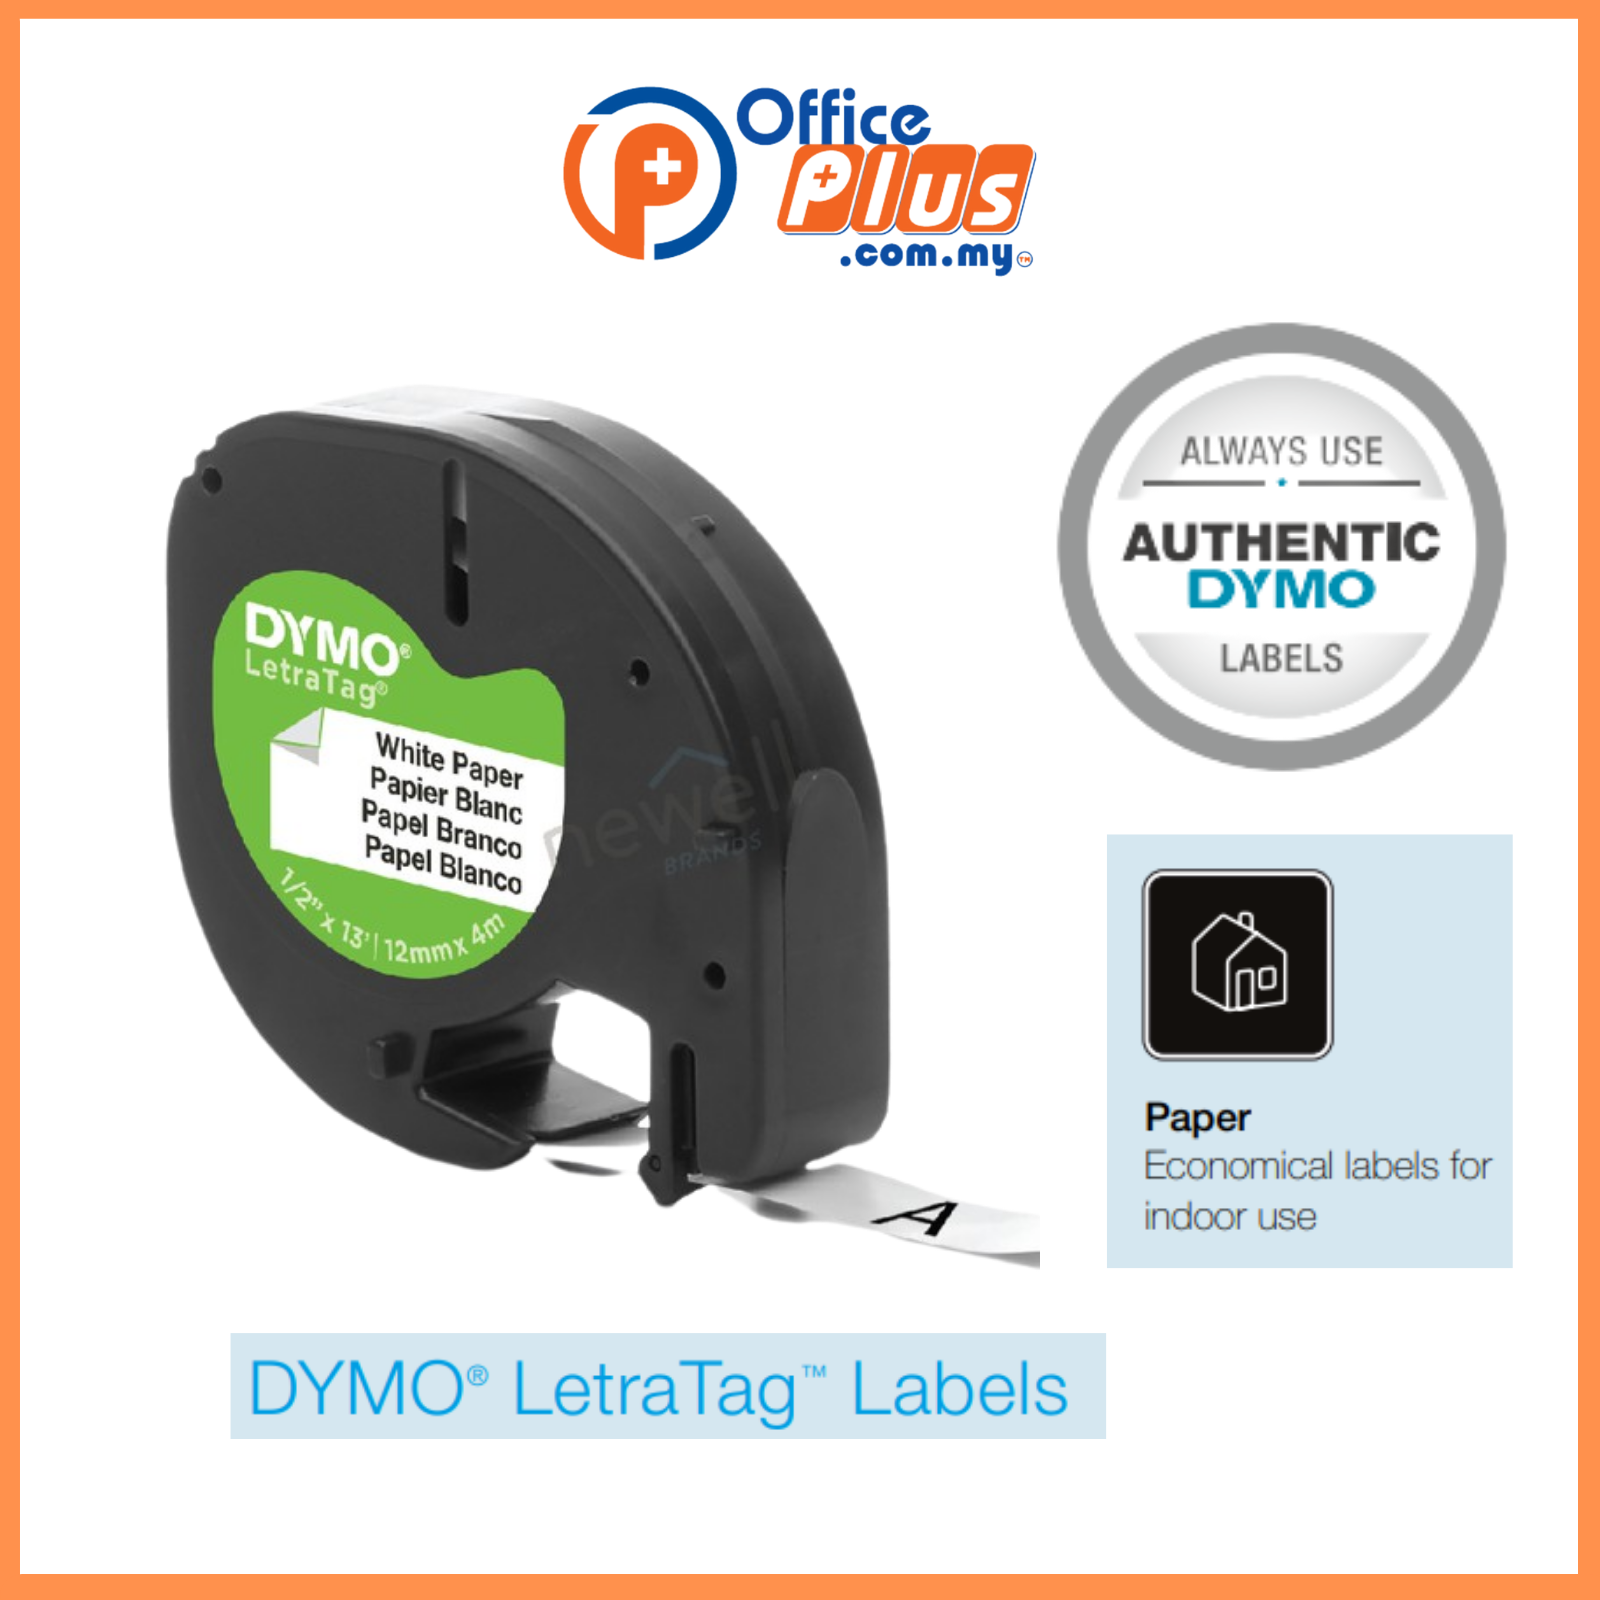 Dymo 59425 tape LETRA TAG self-adhesive plastic width 12mm, roll 4m, color  green - merXu - Negotiate prices! Wholesale purchases!